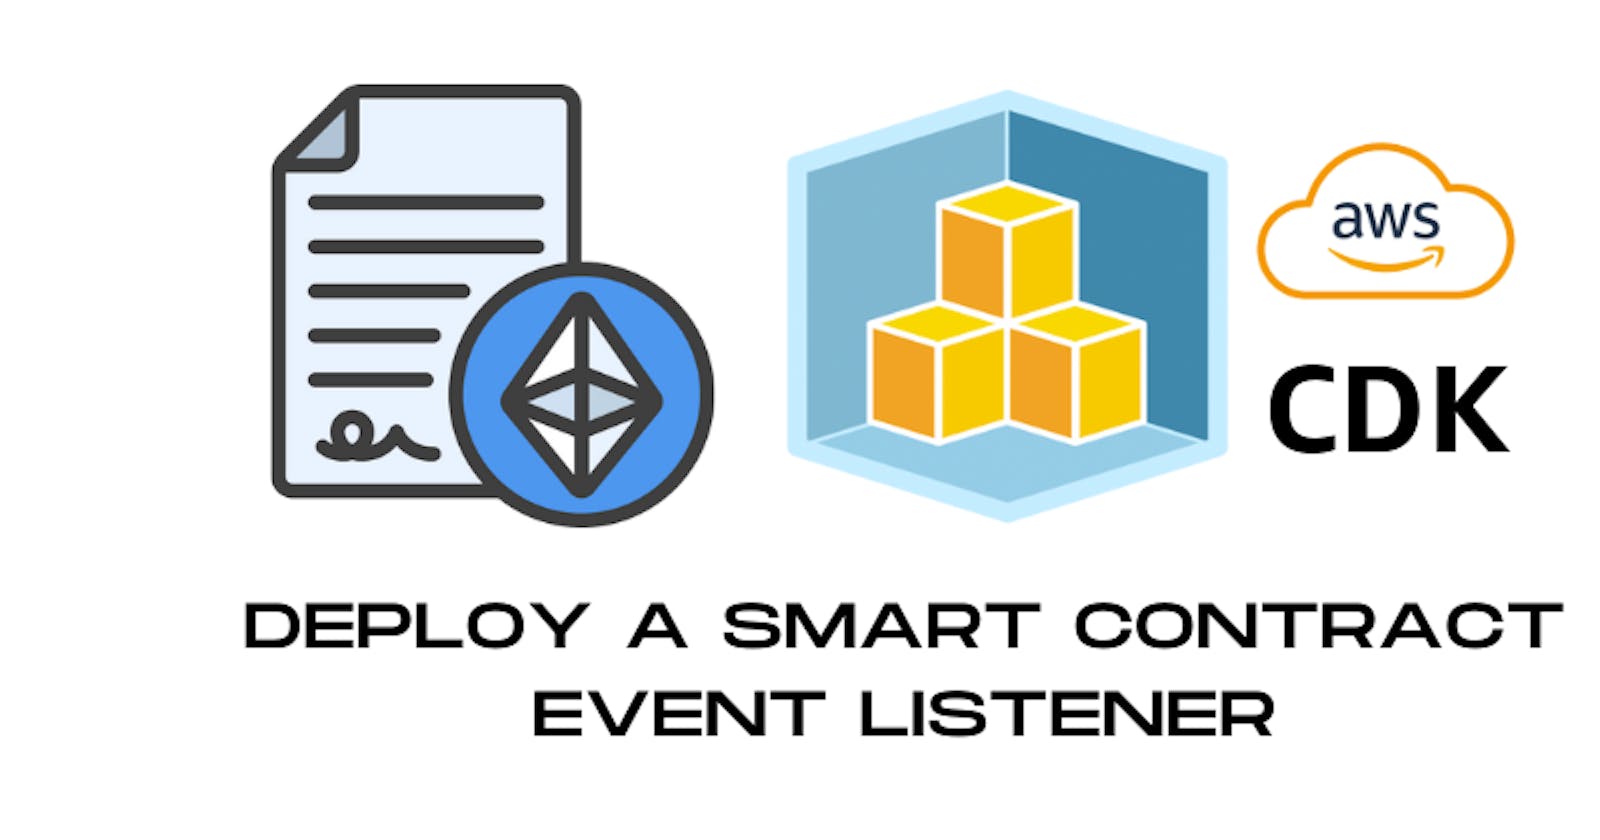 How to Implement and Deploy a Smart Contract Event Listener with AWS CDK